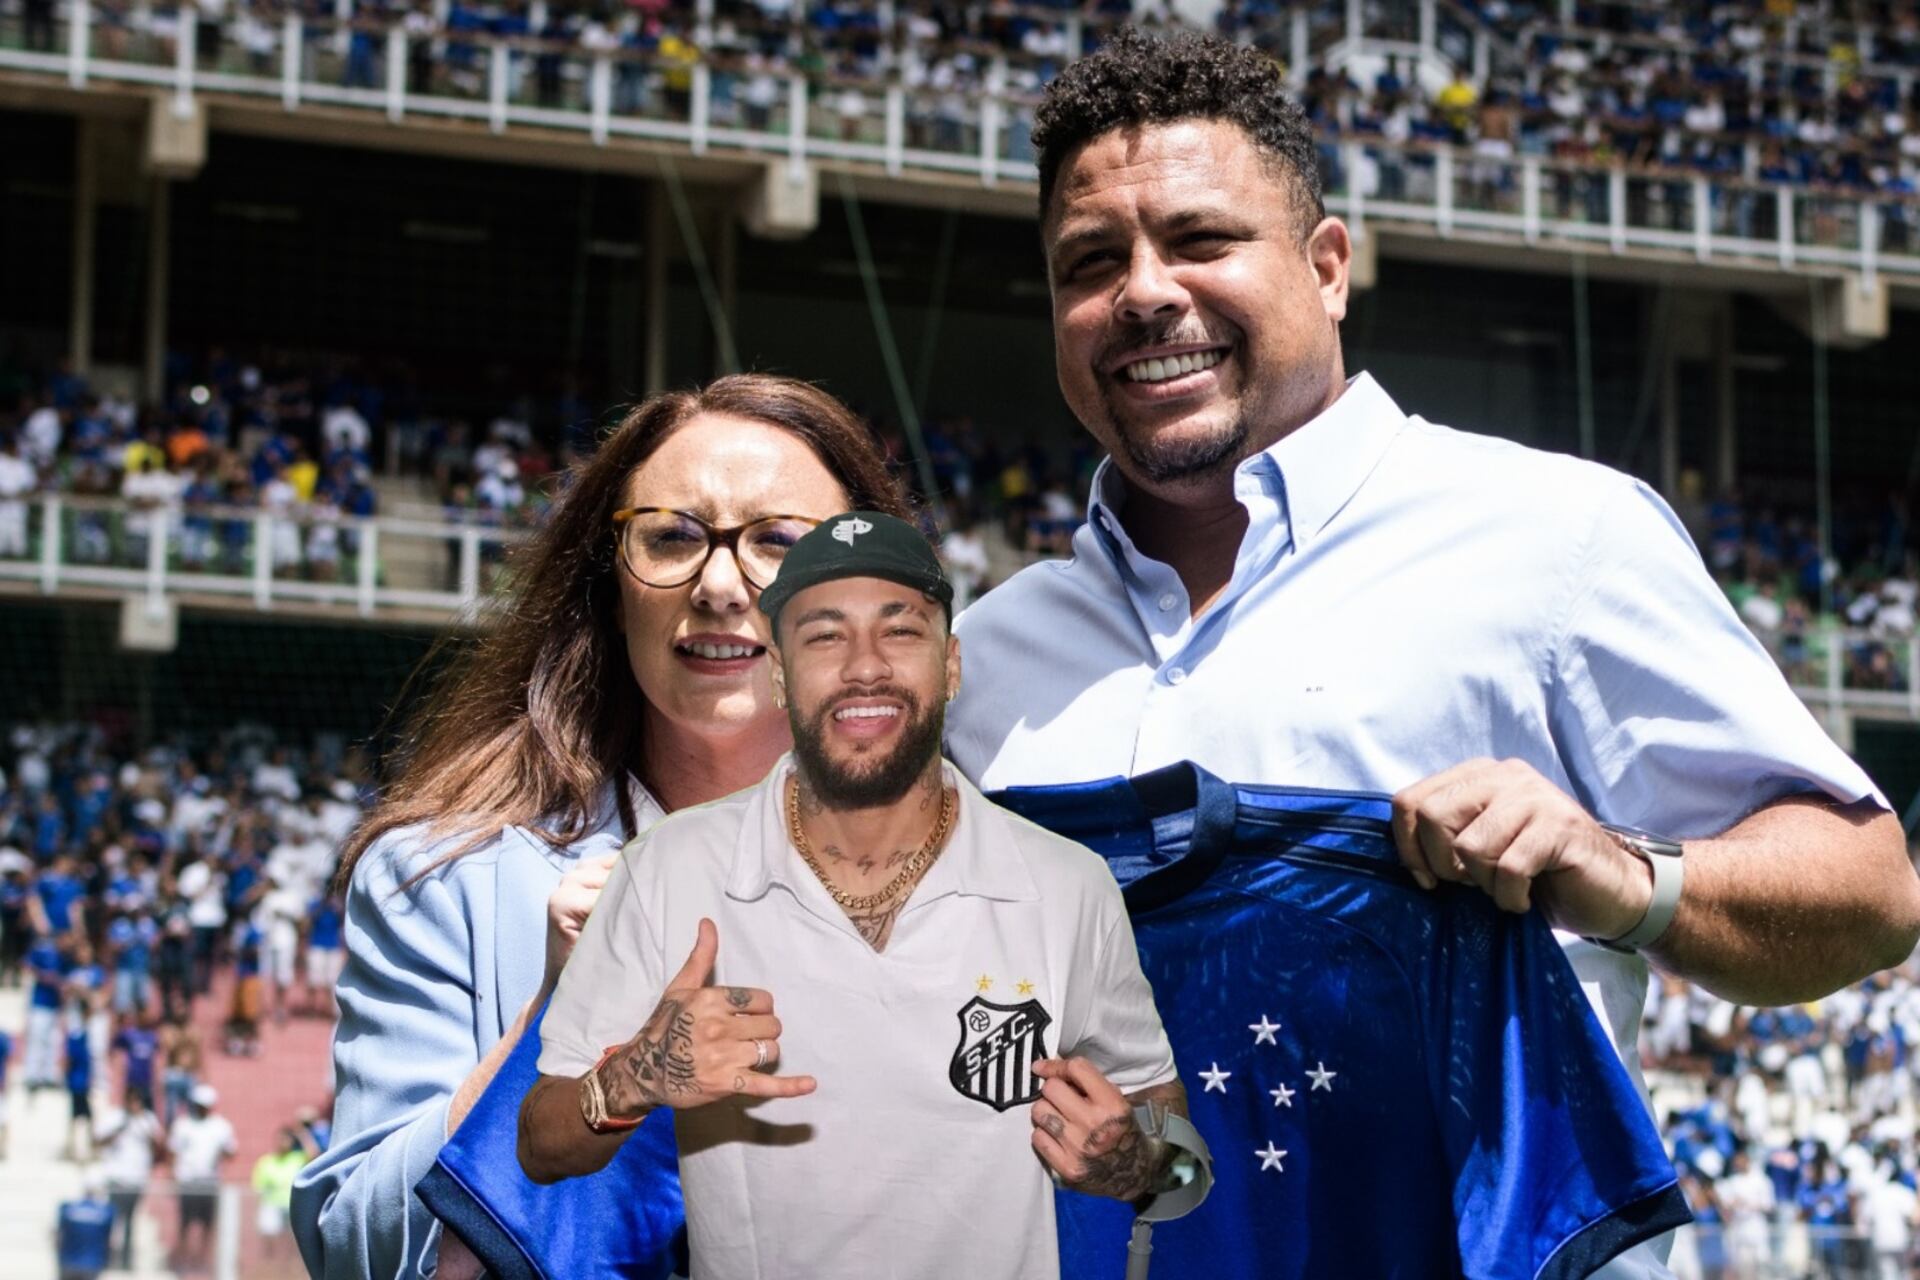 While Ronaldo sold Cruzeiro, what Neymar wants to do with Santos in the future